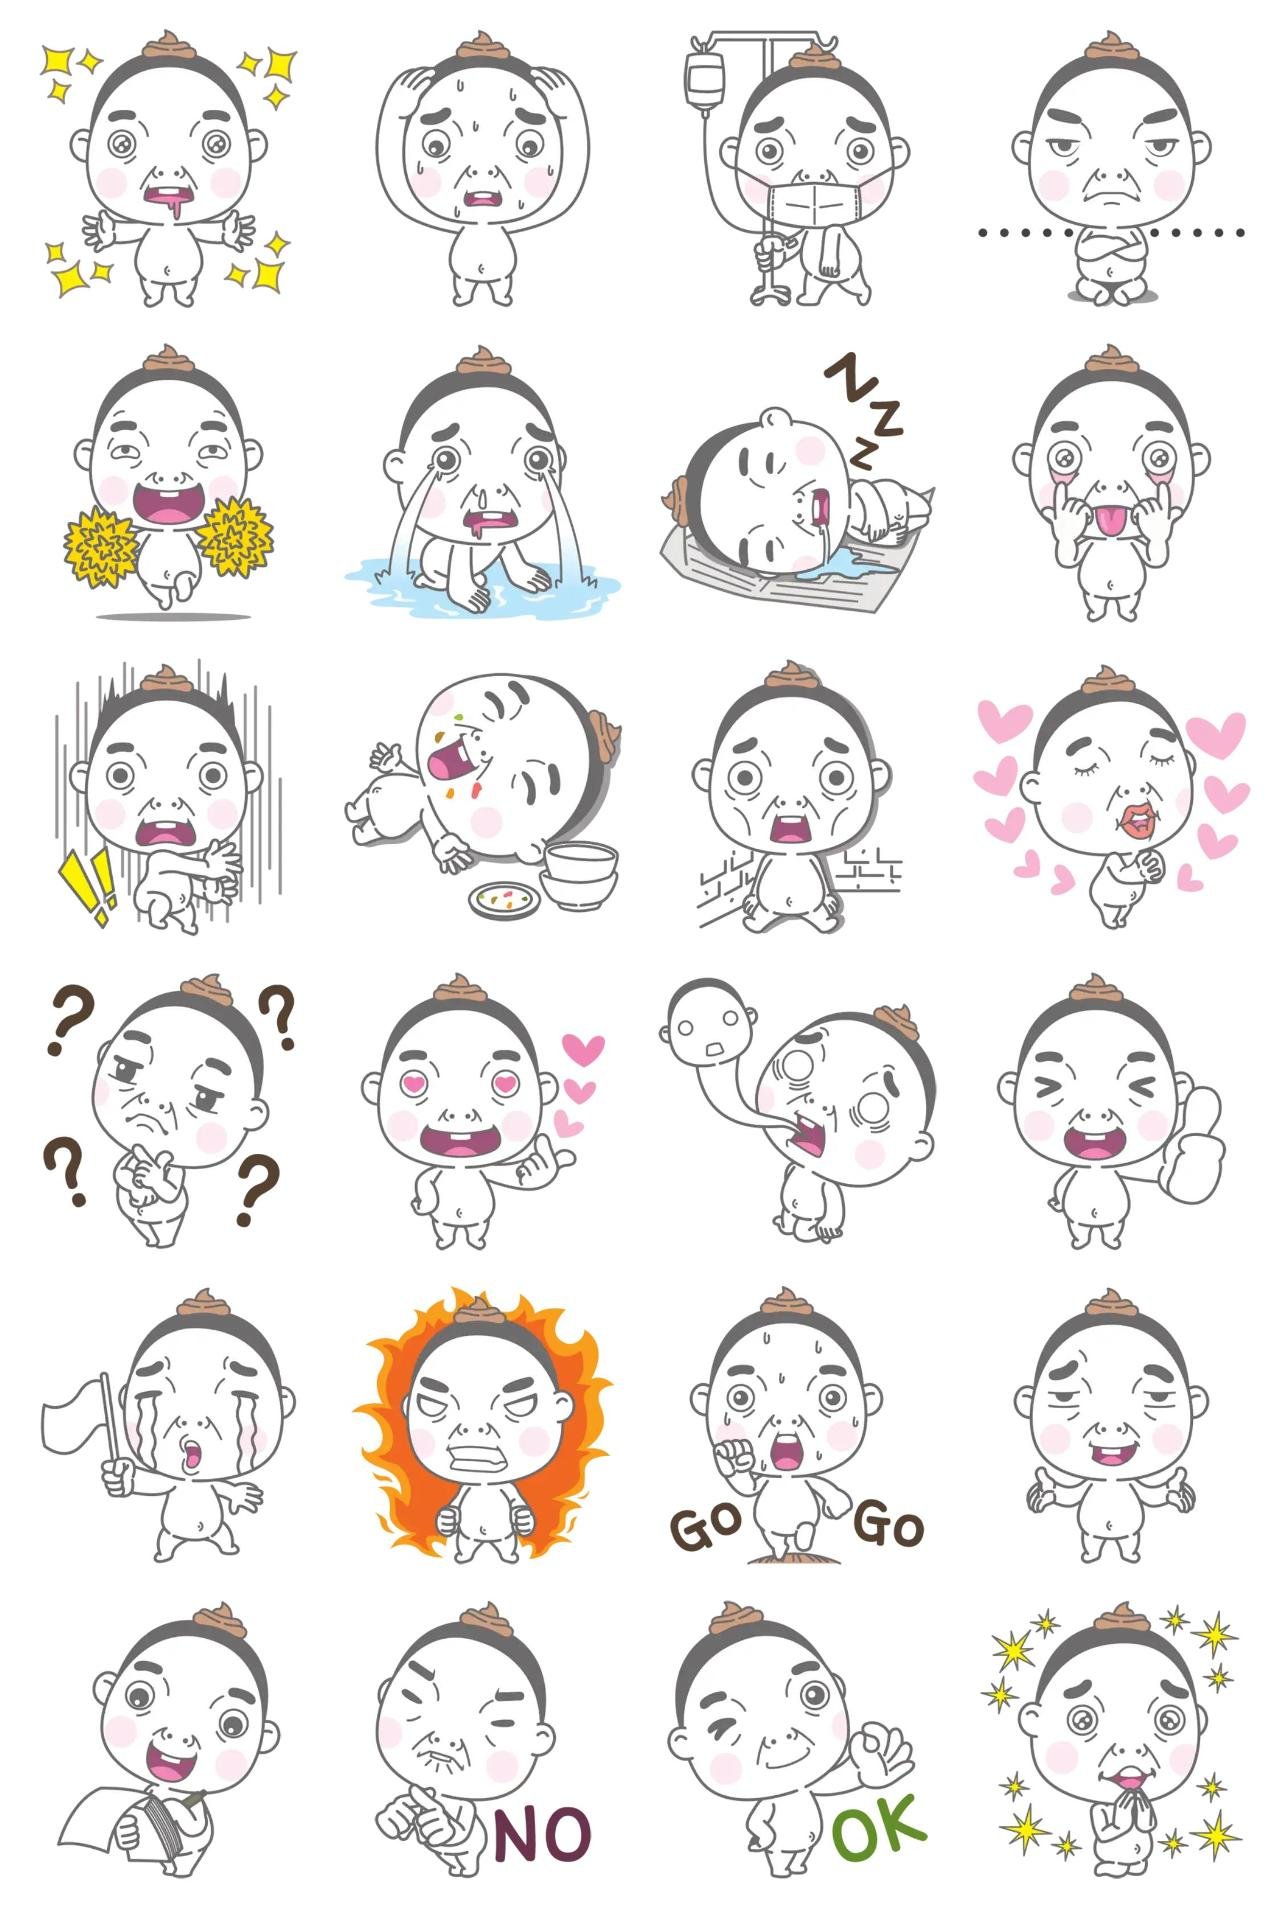 Byunkun Gag,People sticker pack for Whatsapp, Telegram, Signal, and others chatting and message apps